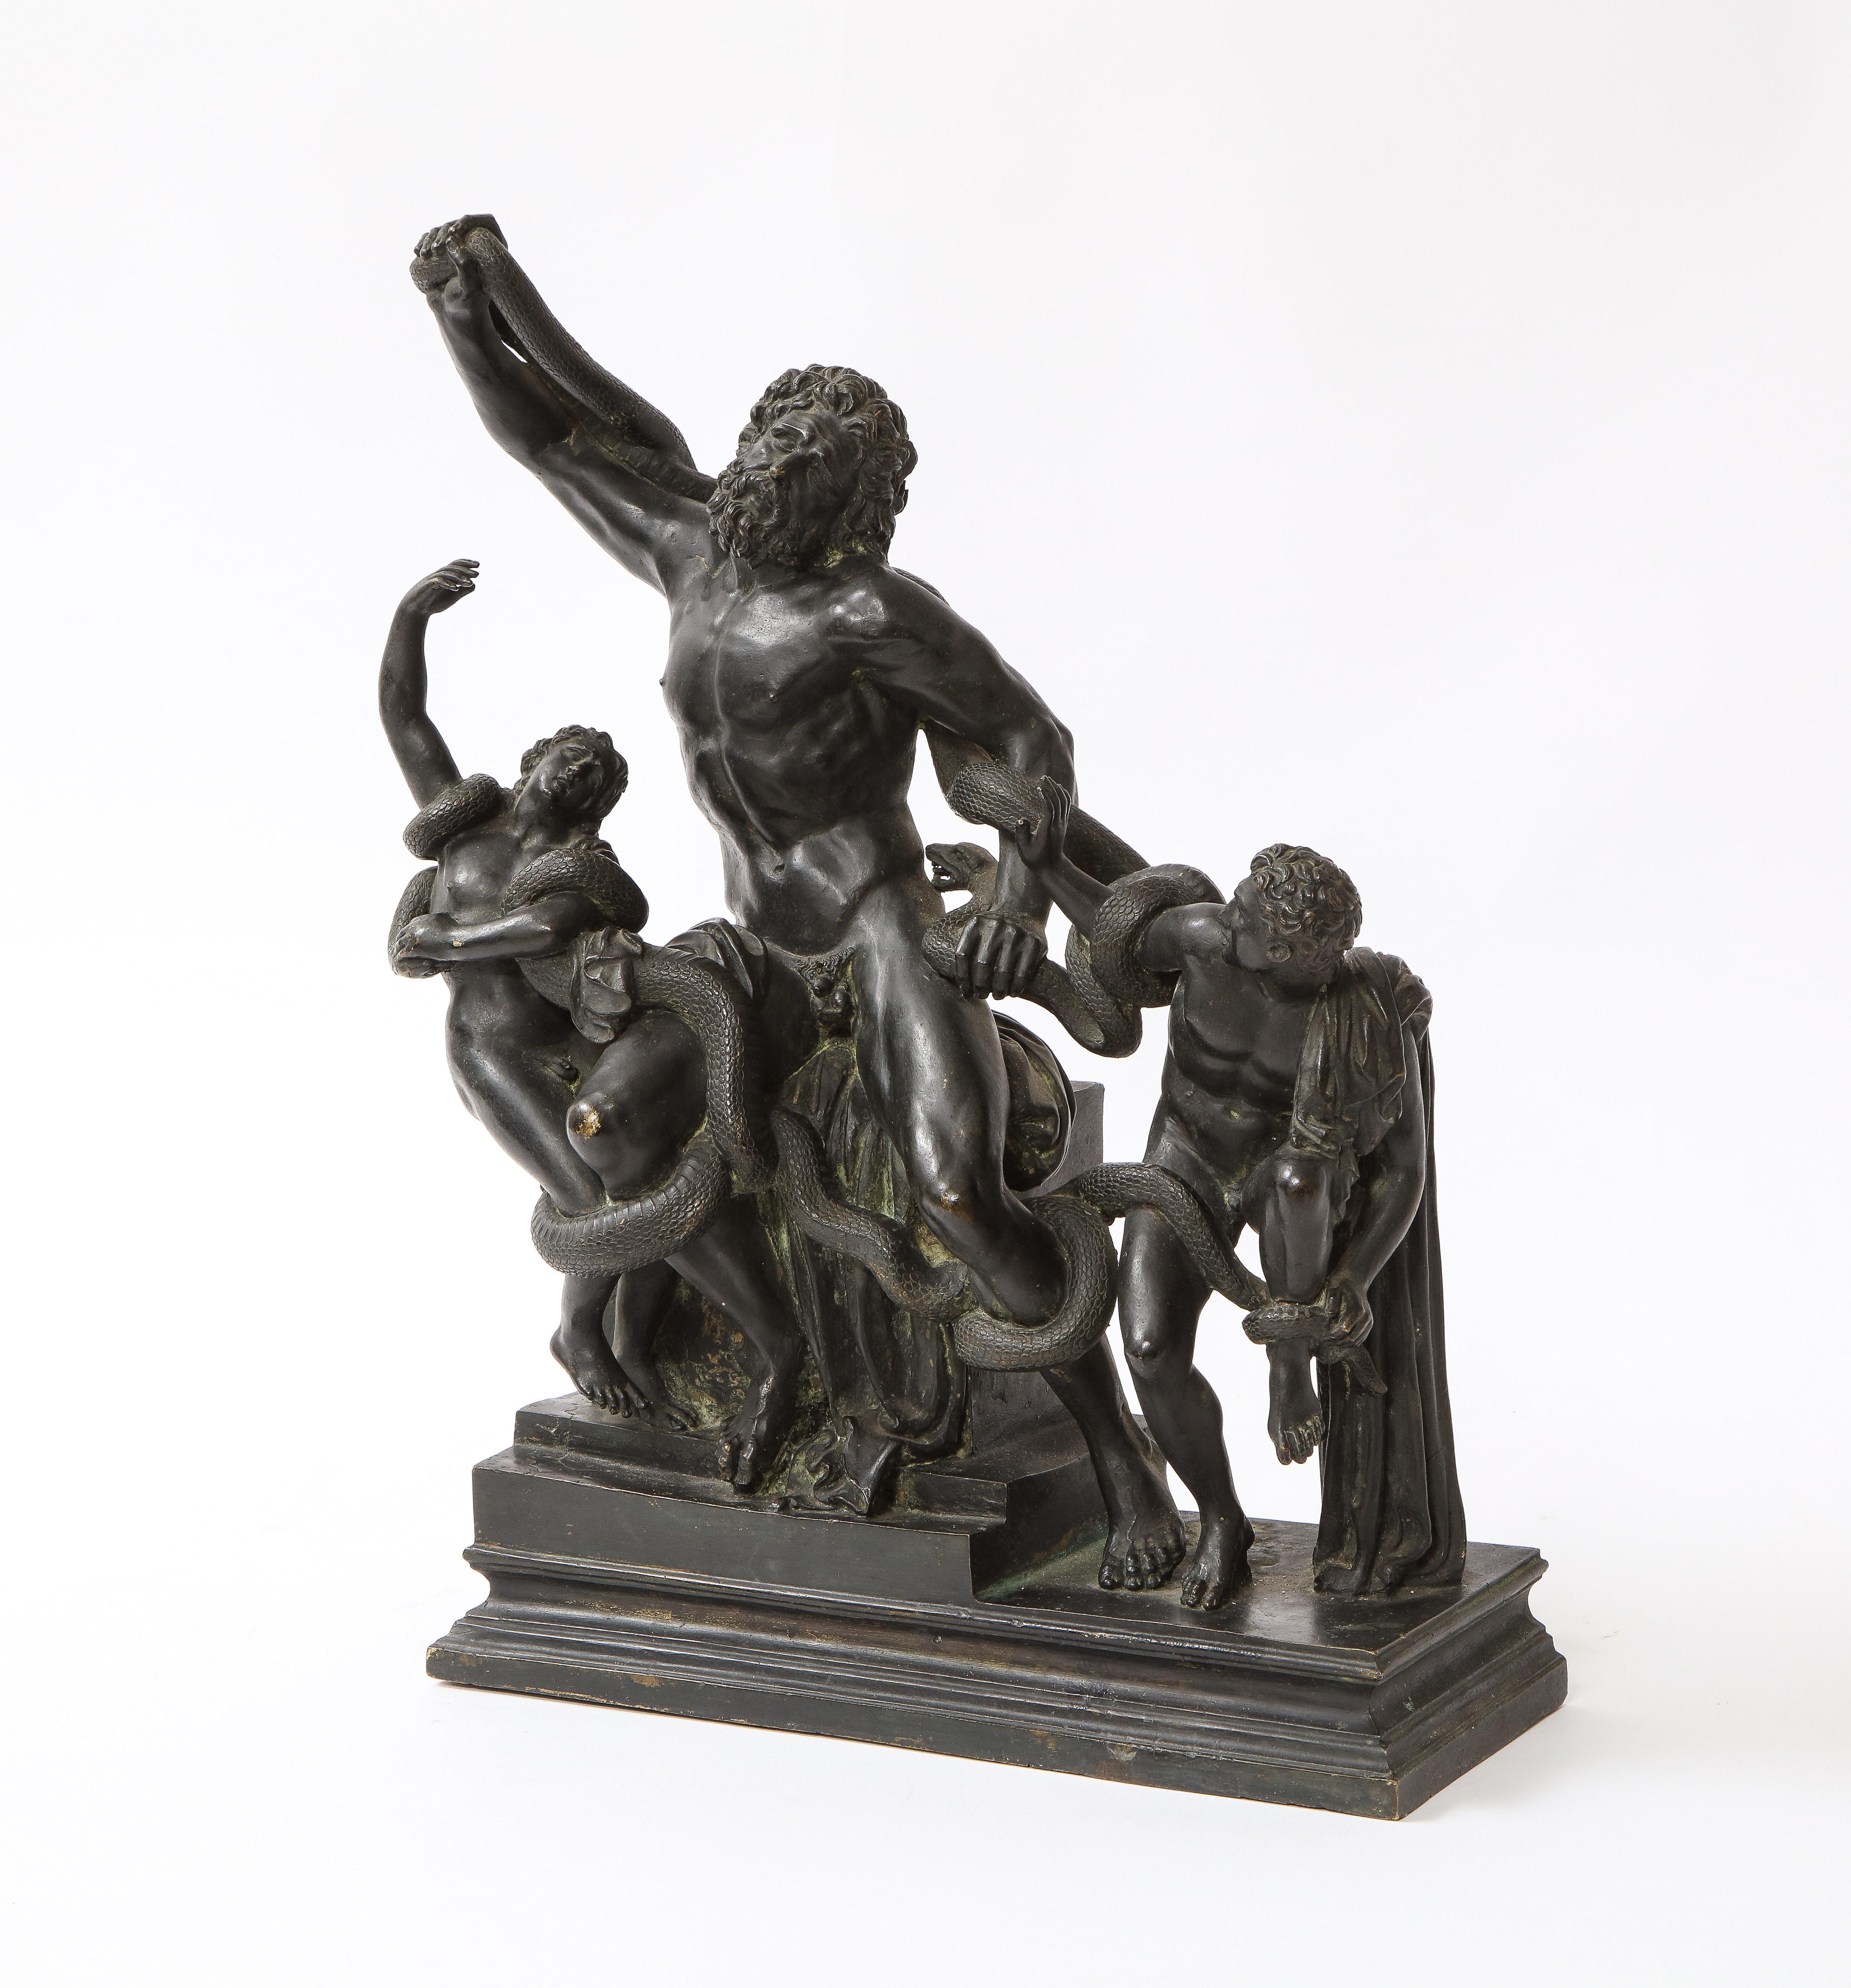 A Marvelous and Pristine Condition Italian Early Example, Late 17th to Early 18th Century Patinated Bronze Model of Laocoön.  This piece is marvelously cast, hand-chassed, and hand-chiseled with the finest detail.  The patina is original from the